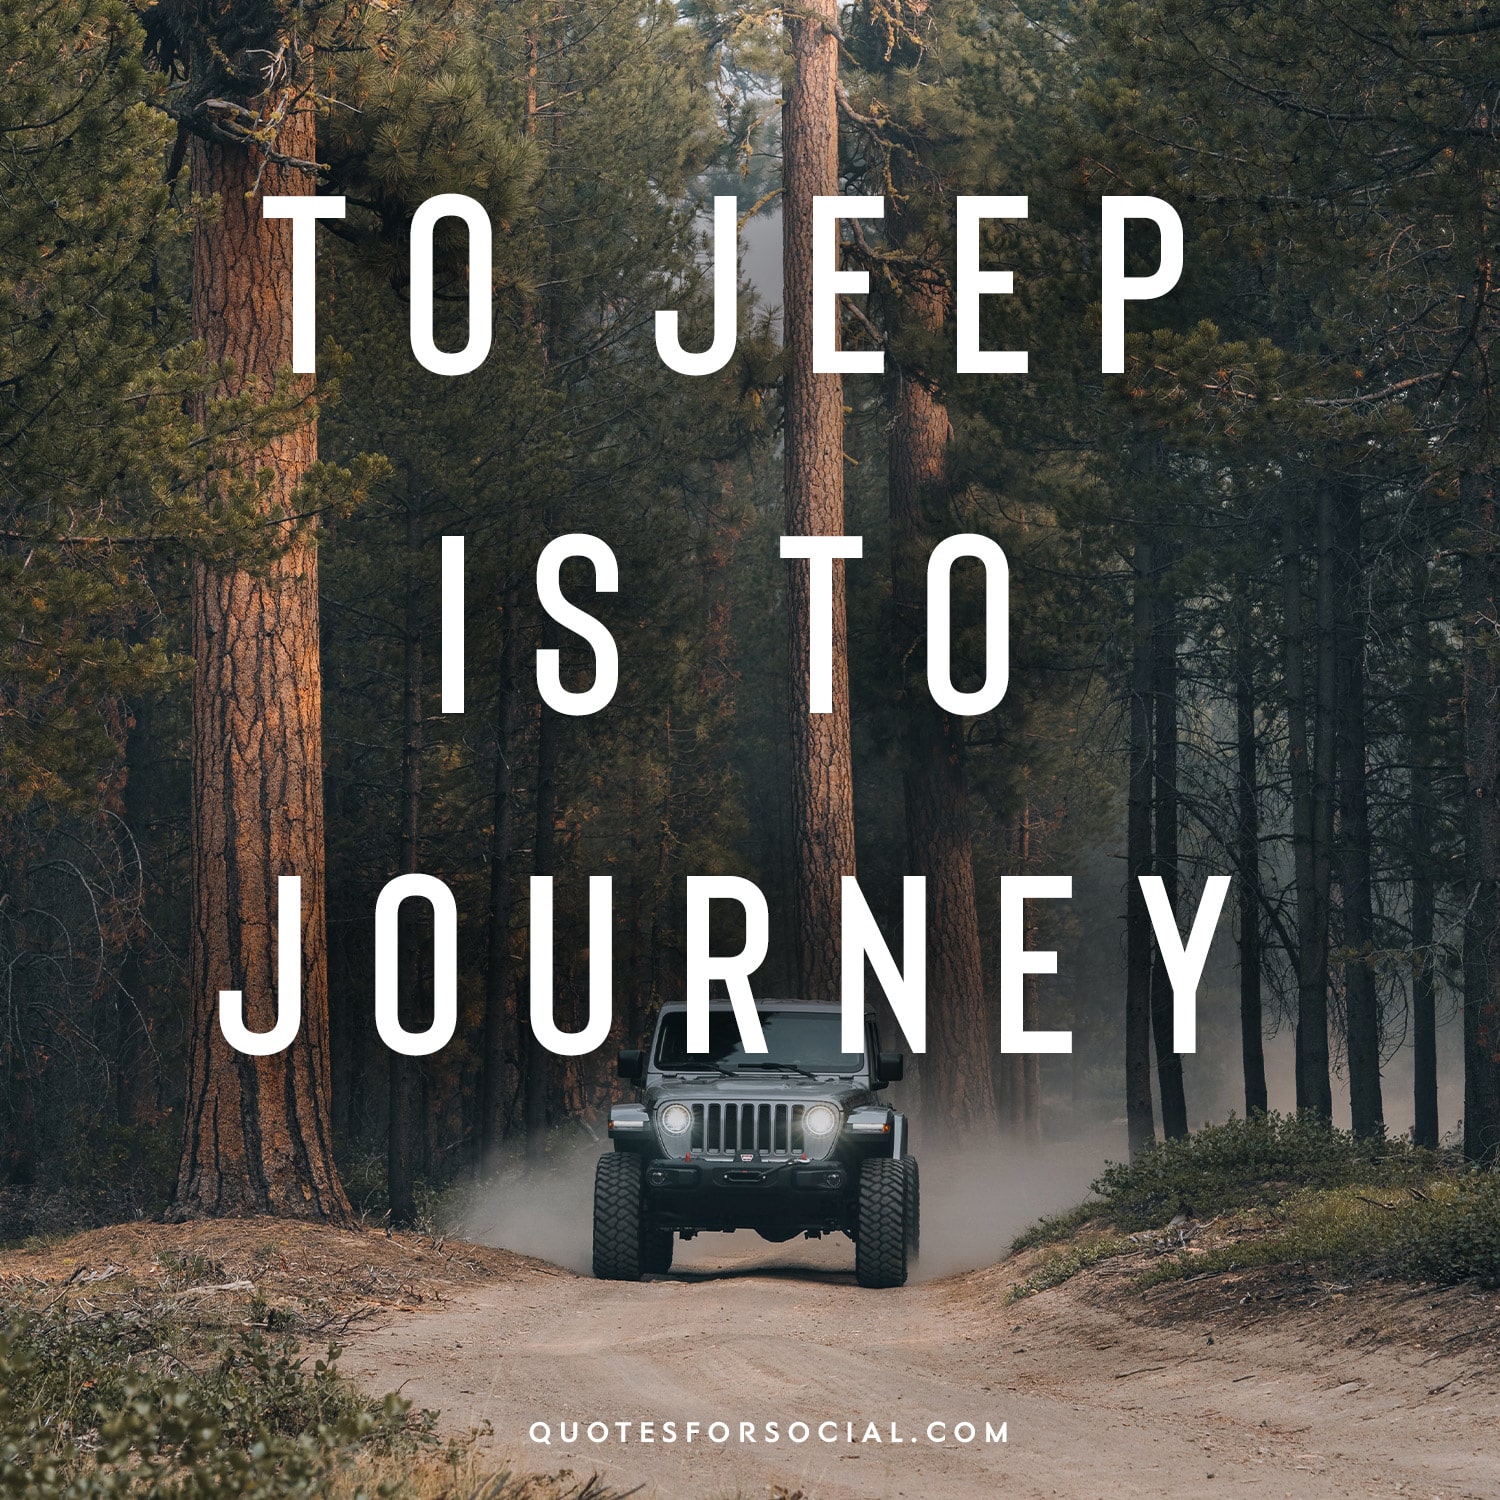 Jeep quotes for Instagram